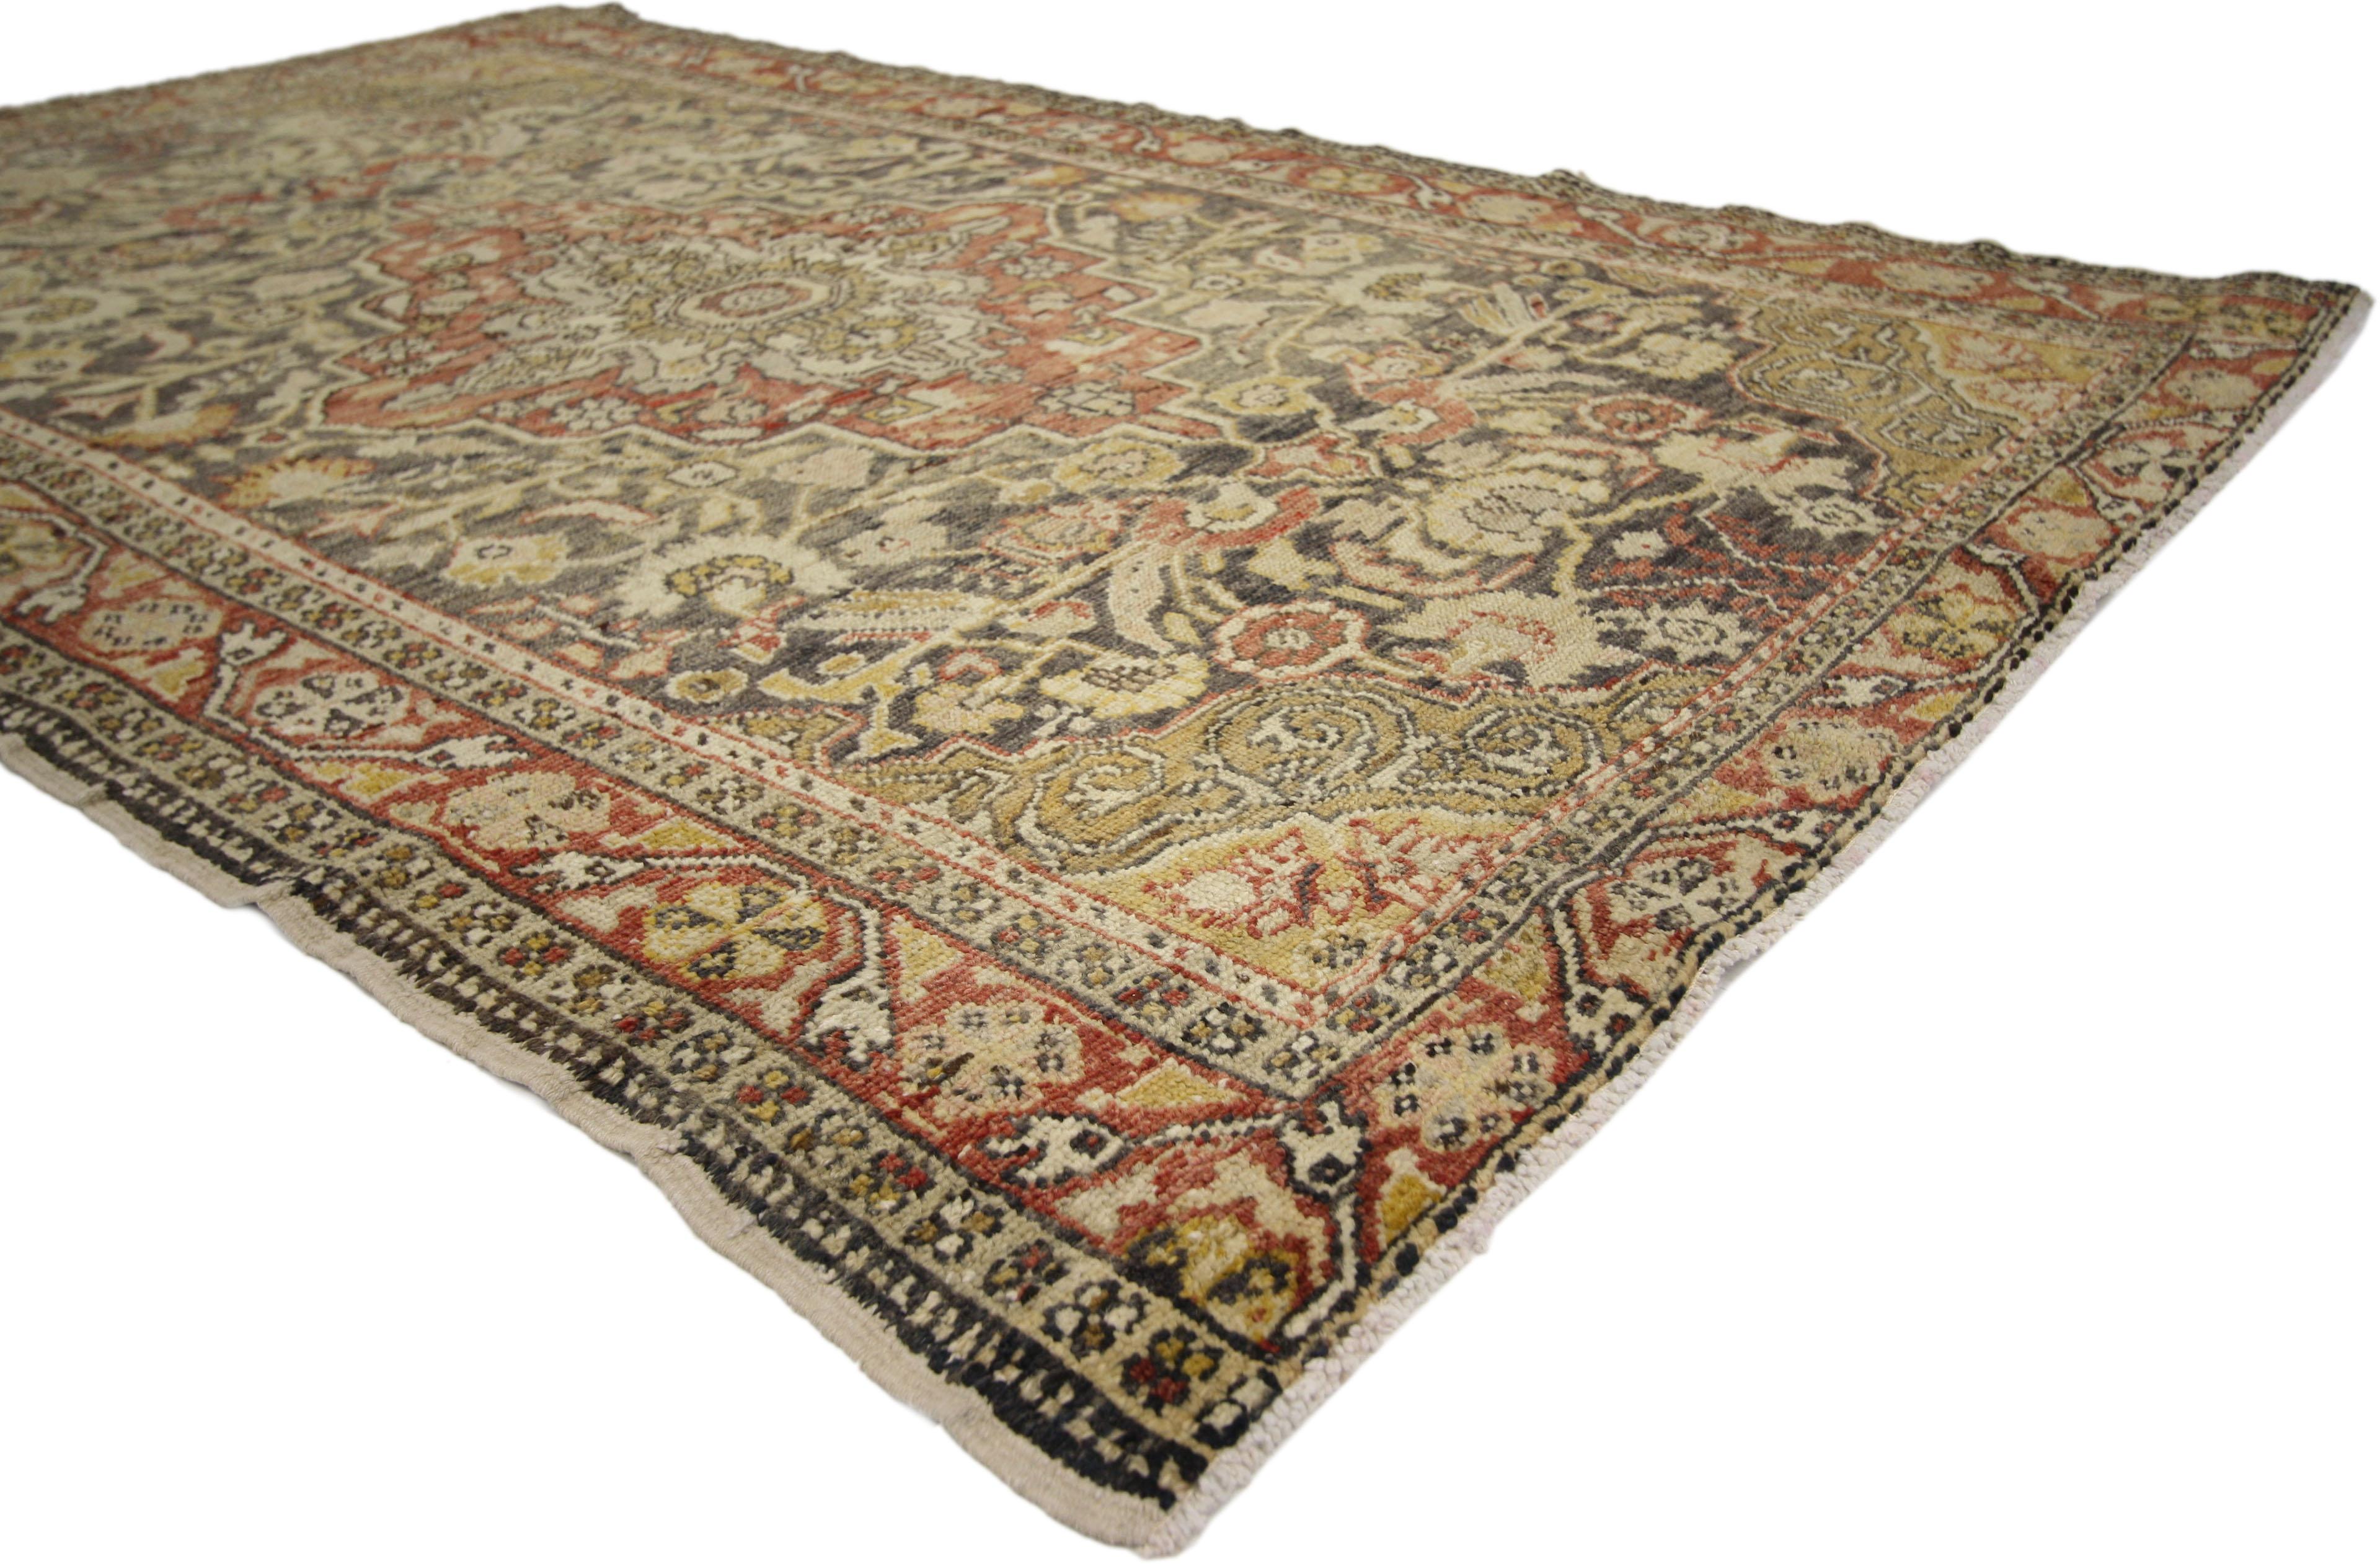 50245 Antique Turkish Sivas Rug, 04'03 x 06'06. 
With warm spice-tones and lovingly rustic appearance, this hand knotted wool antique Turkish Sivas rug embraces English Manor style. It features an intricate central medallion surrounded by an